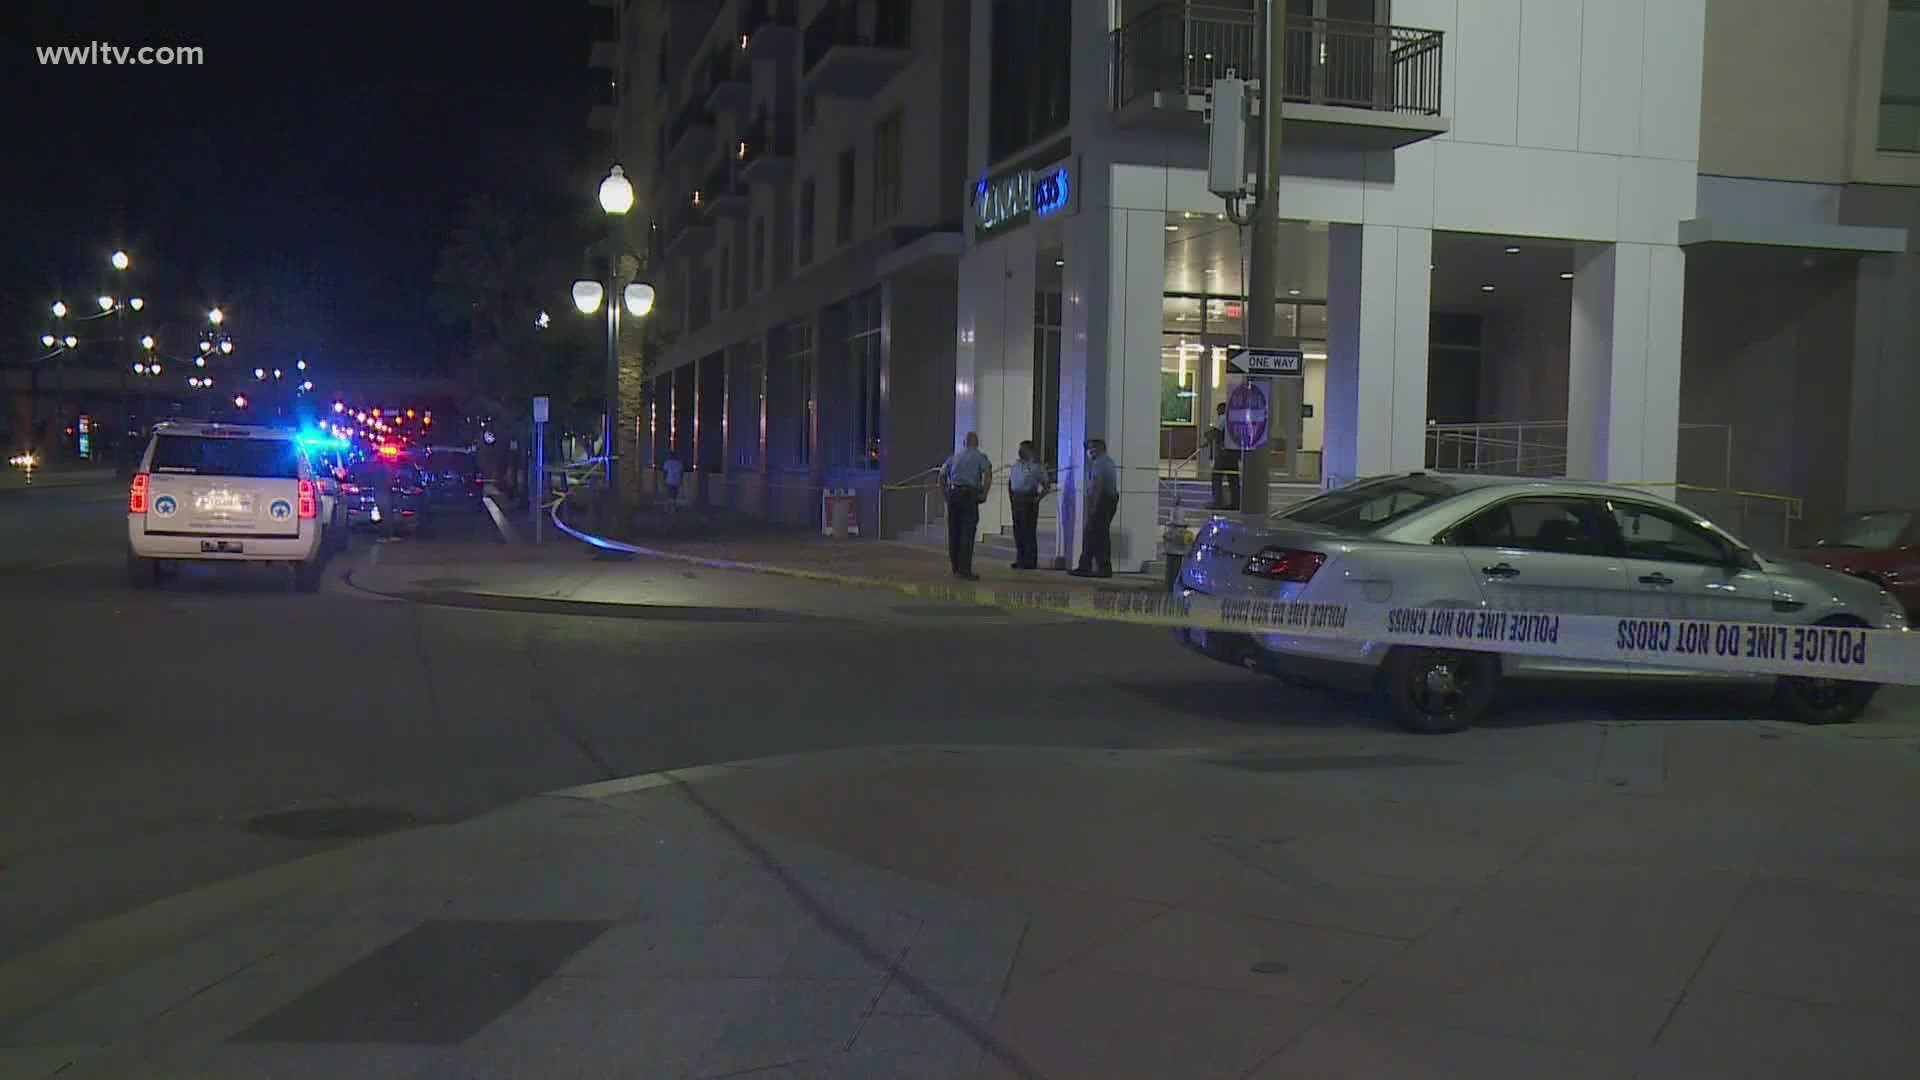 4 people were fatally shot near Dillard University; another was killed in the Central Business District.